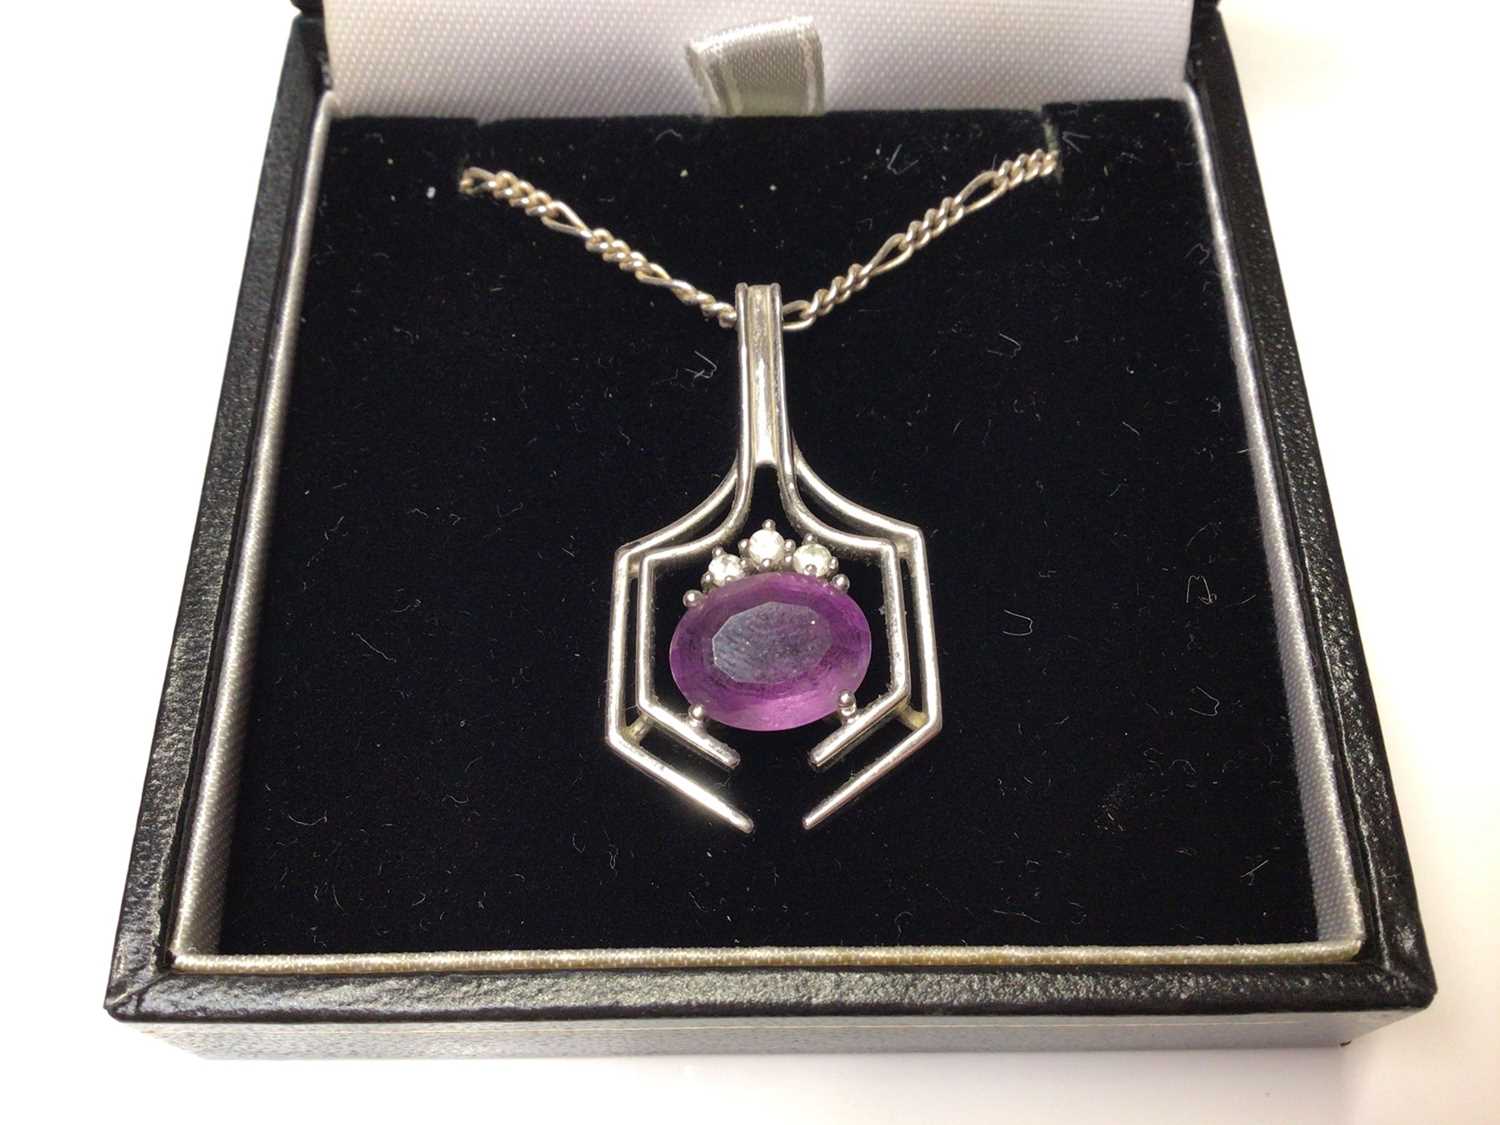 Lot 43 - 18ct white gold diamond and amethyst pendant on a silver chain.